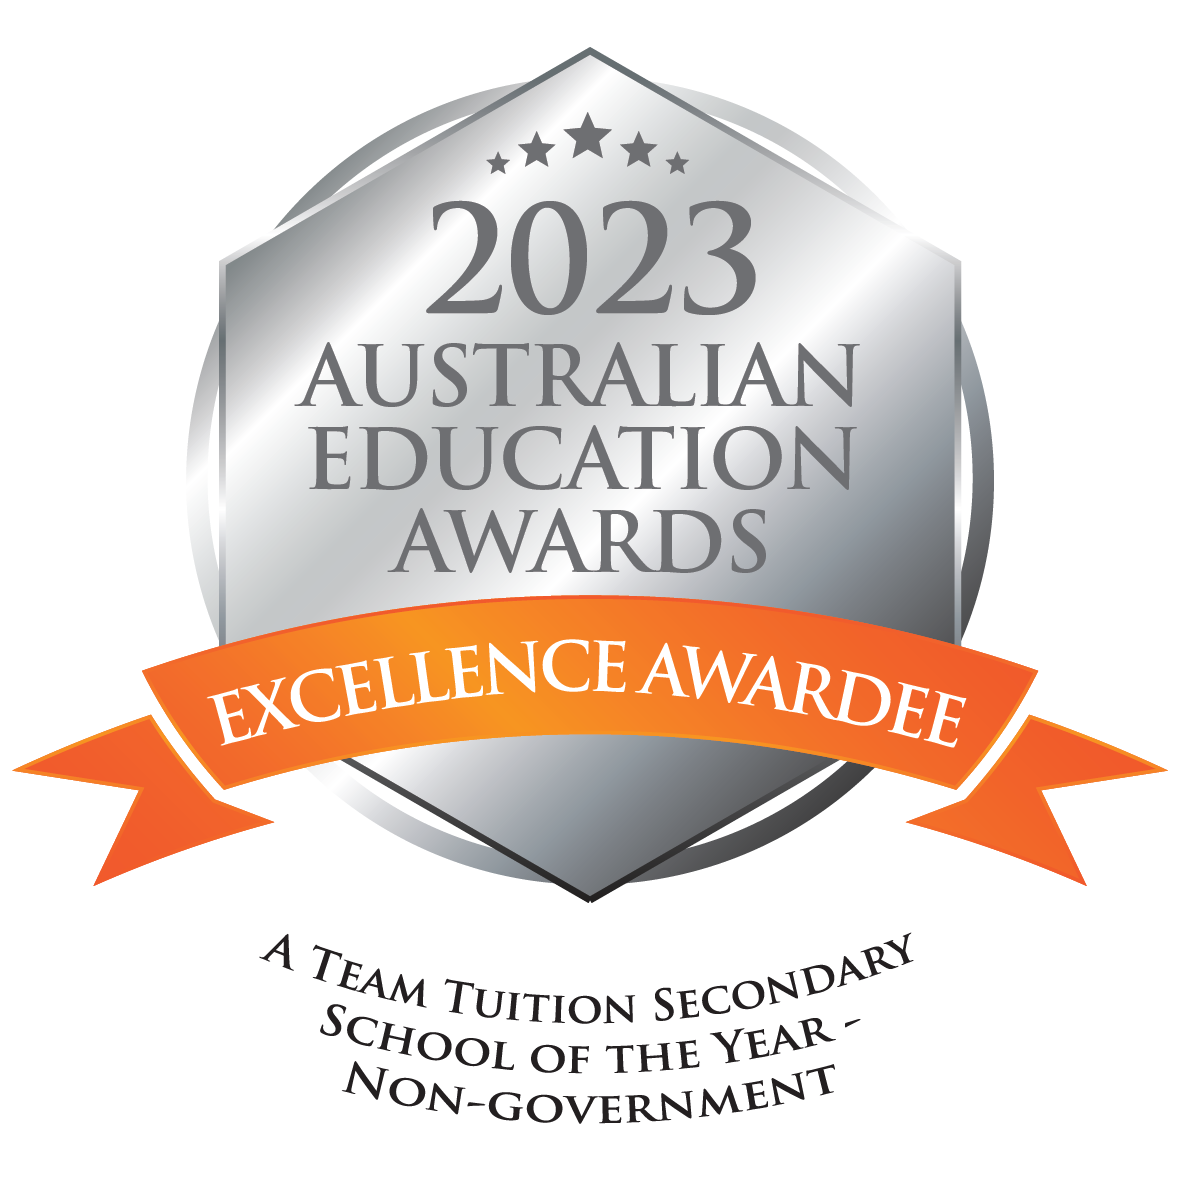 AEA23 - Excellence Awardee Medal Secondary School of the Year - Non-government - St Margaret's Anglican Girls School